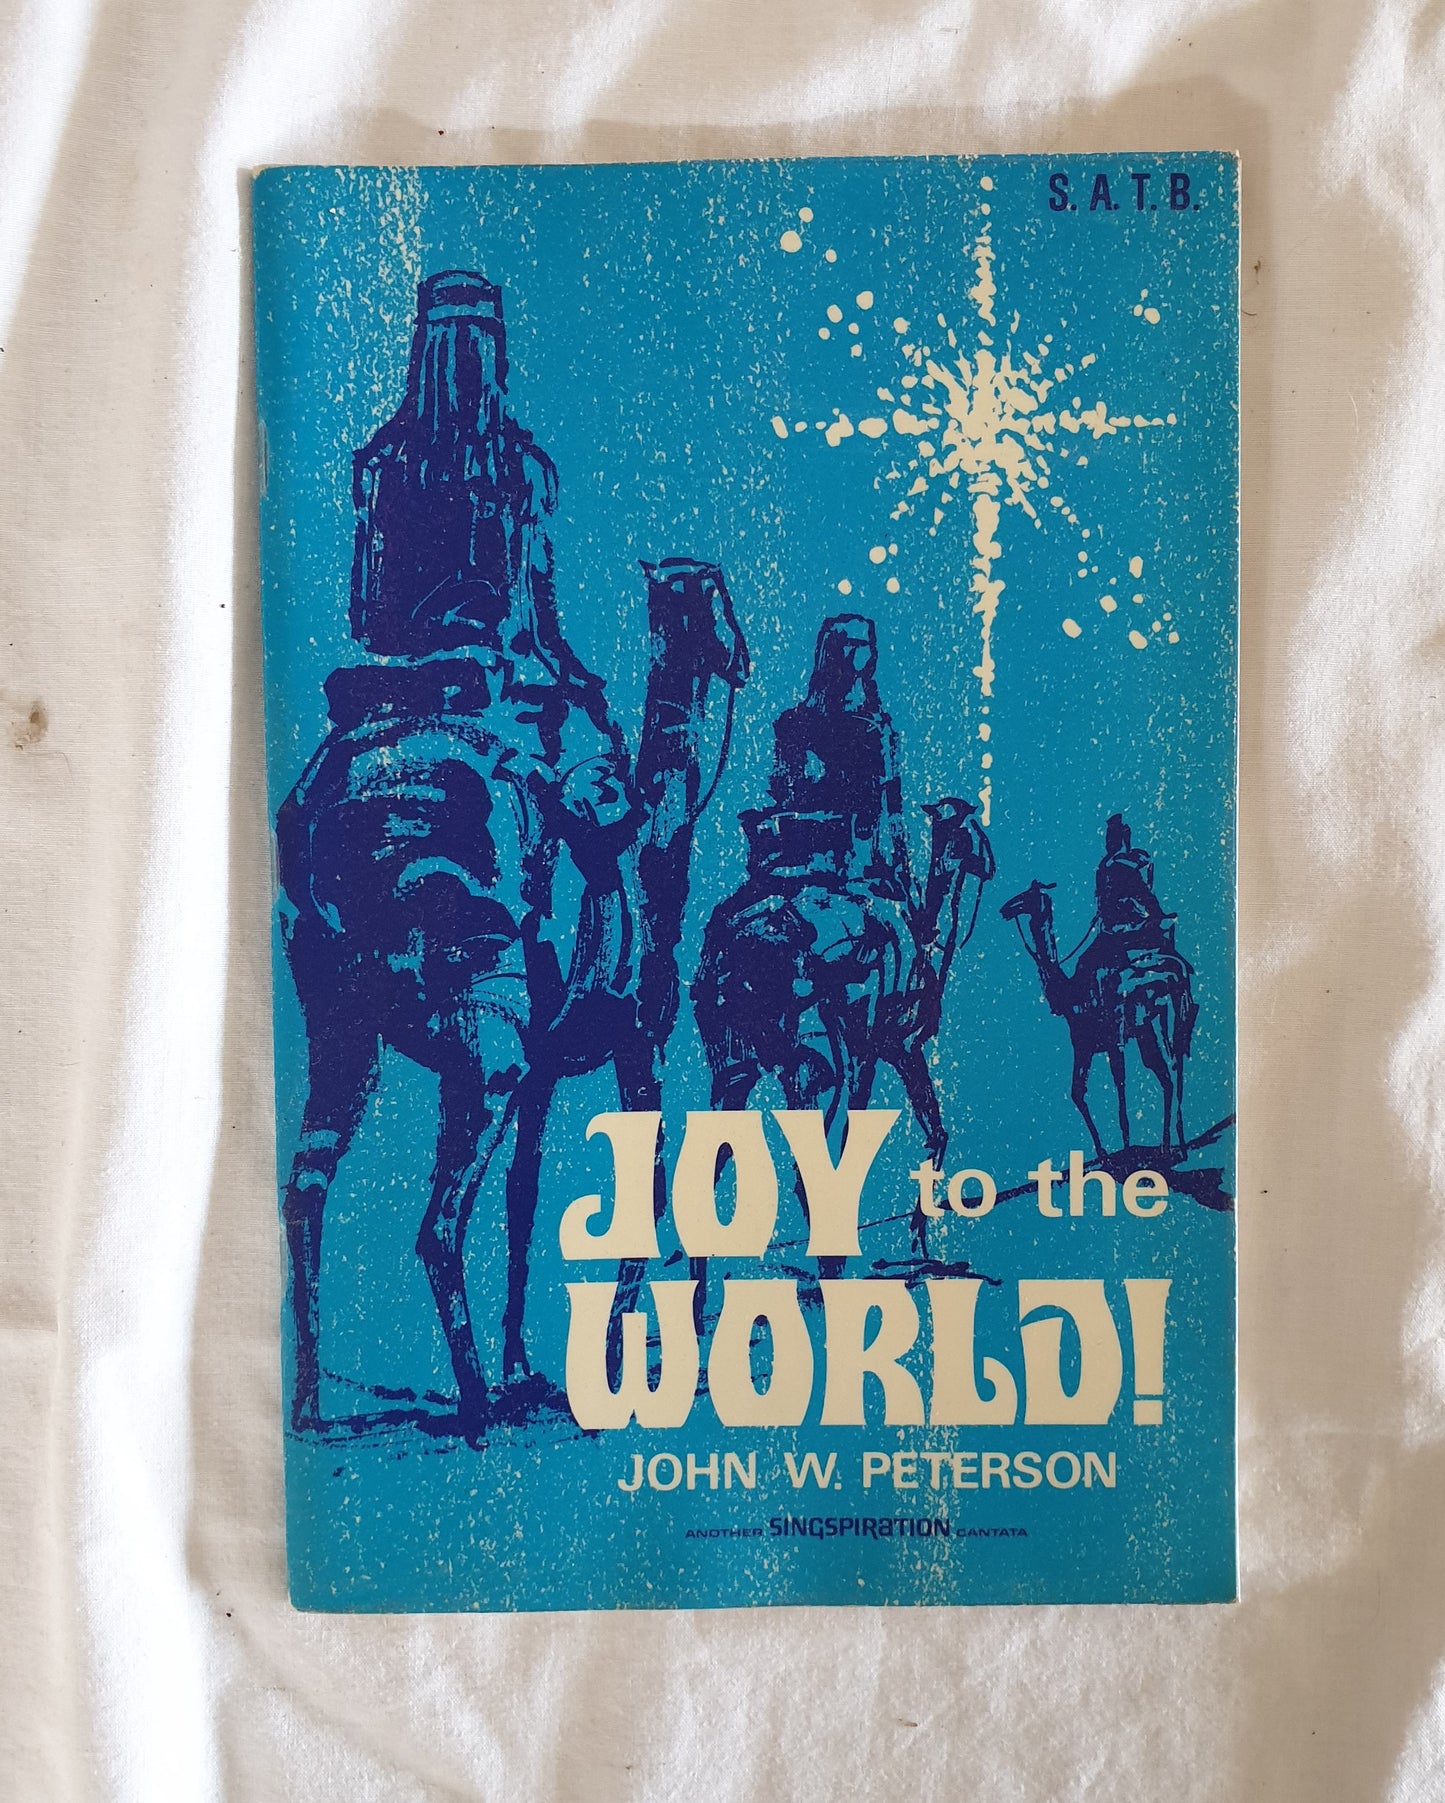 Joy to the World!  by John W. Peterson